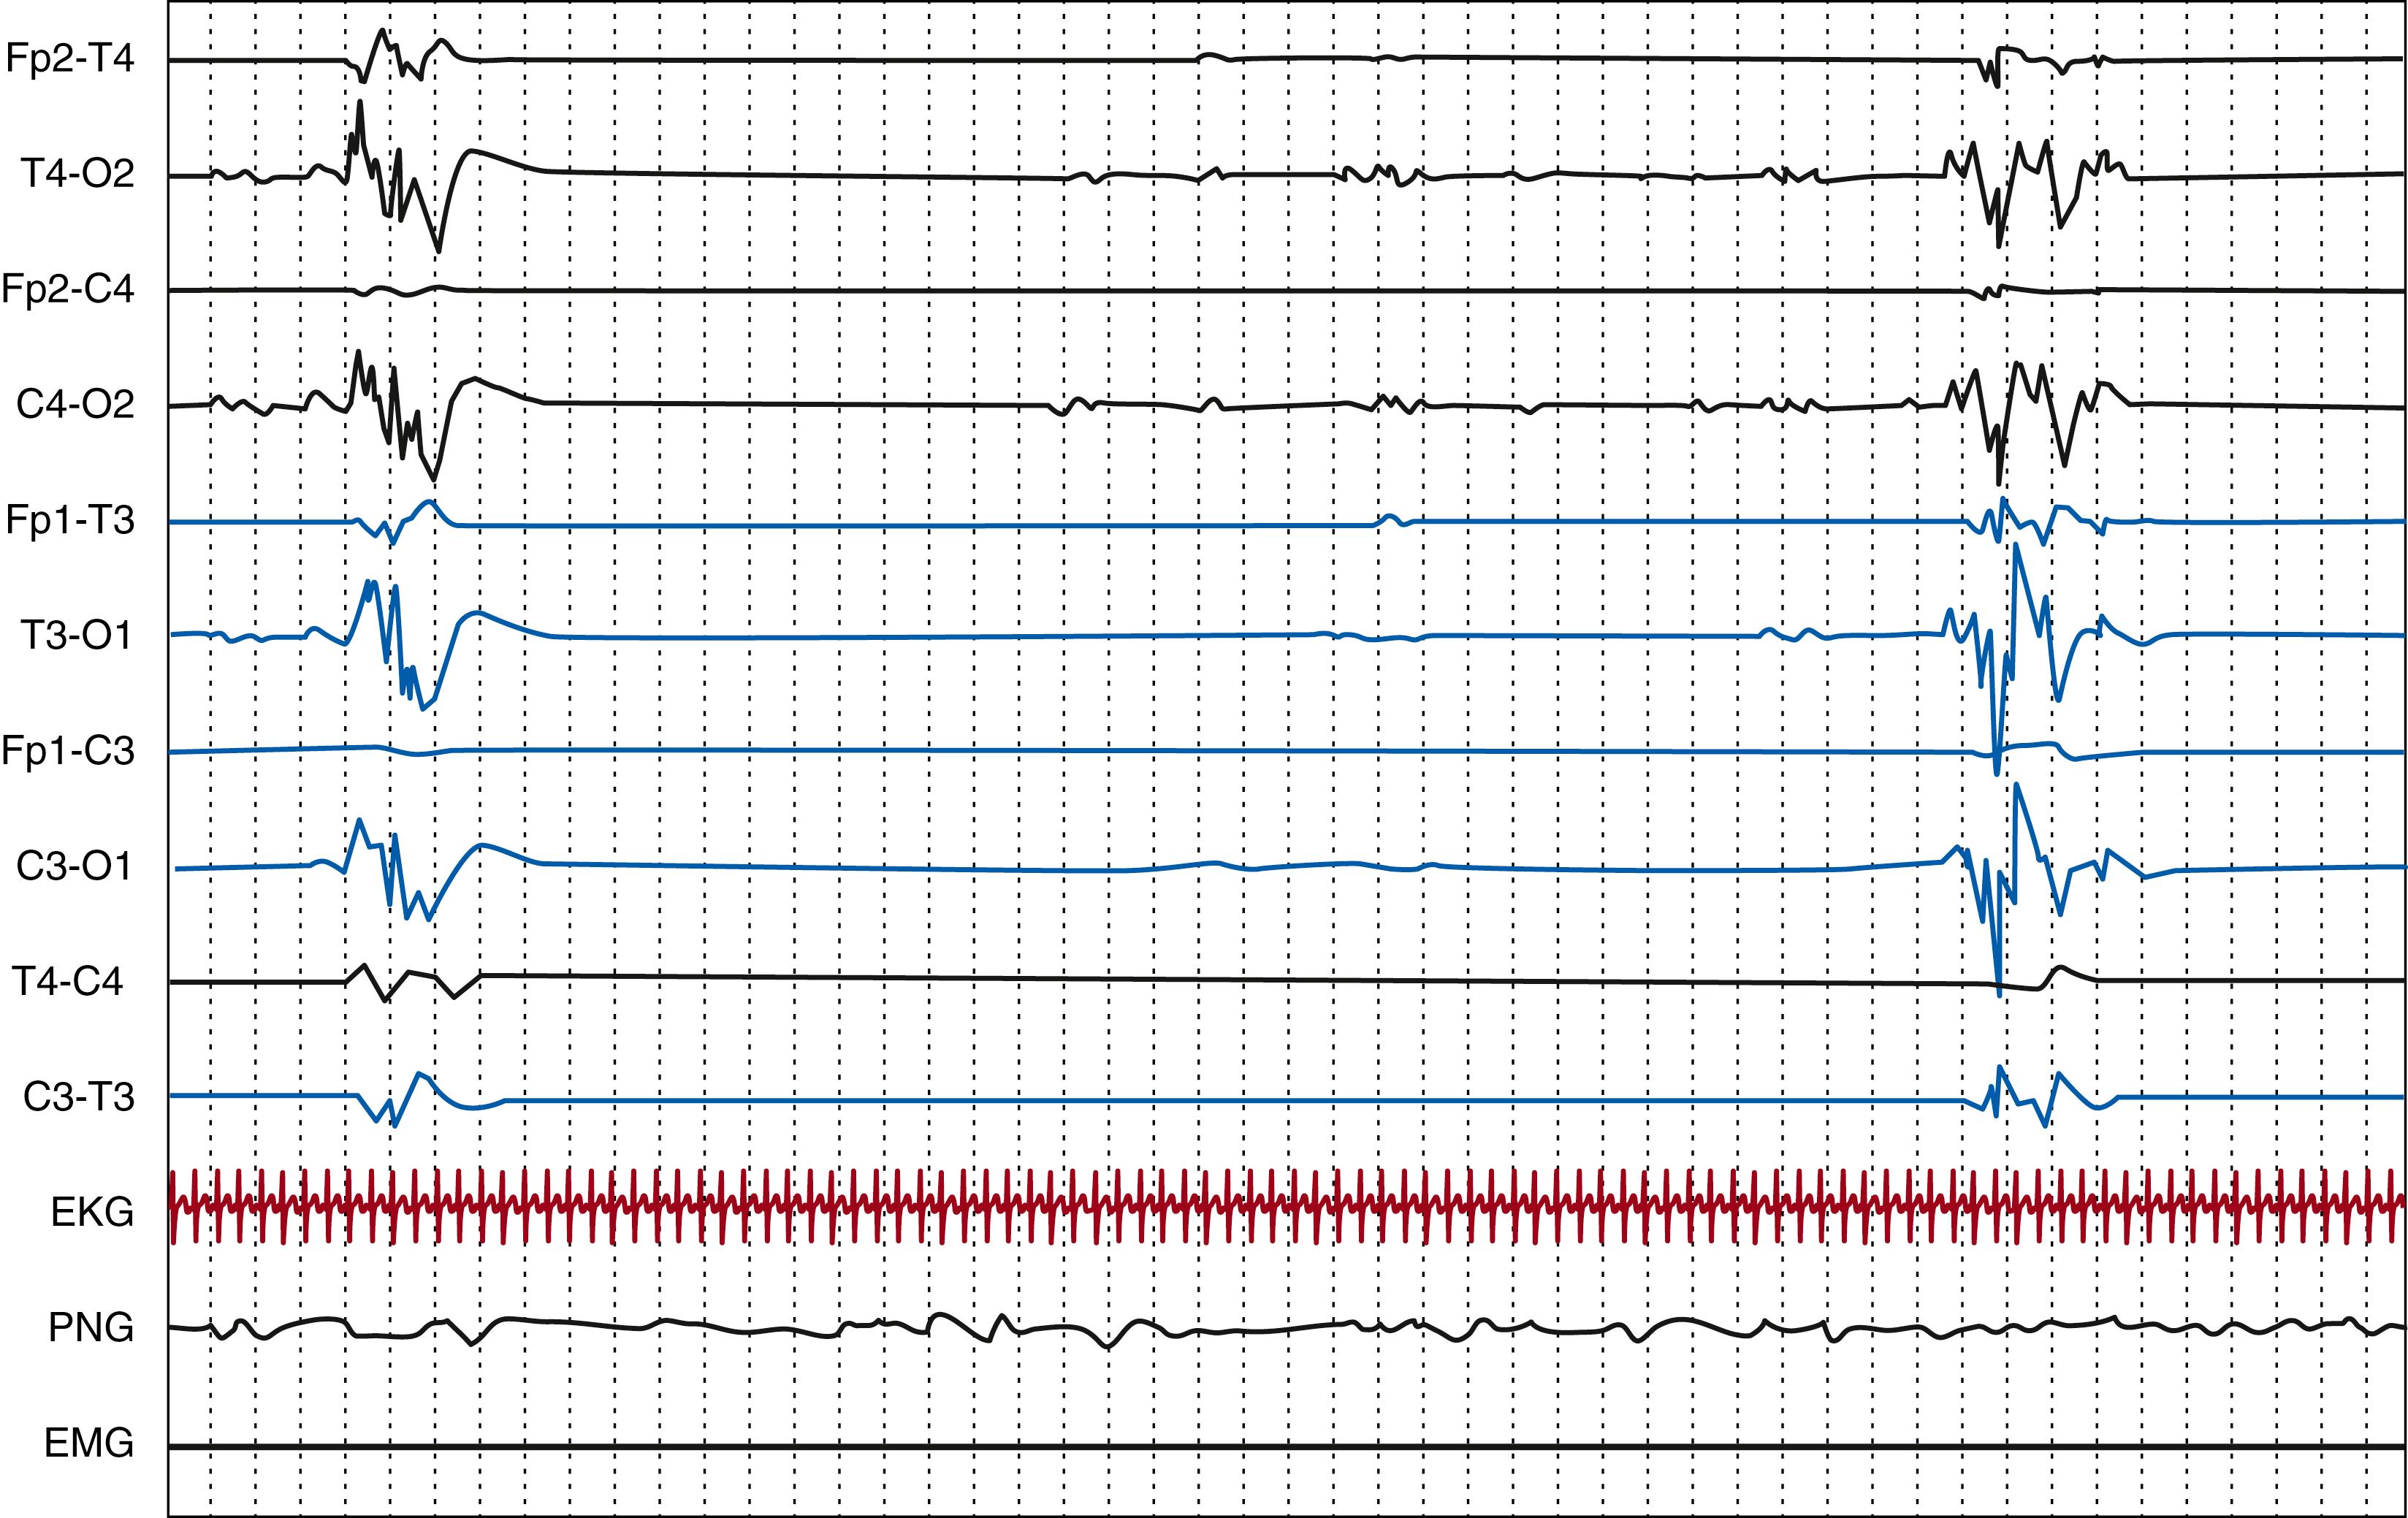 Fig. 130.4, Polygraphic electroencephalography tracing recorded at 1 week of age (25 weeks postmenstrual age) in a preterm neonate born at 24 weeks. Discontinuous tracing. Delta bursts of 3 seconds duration, intermixed with interburst interval of 25 seconds (EEG, EKG, PNG: pneumogram, EMG: right deltoid). Gain, 15 μV/mm; high frequency filter, 70 Hz; paper speed, 120 mm/s.